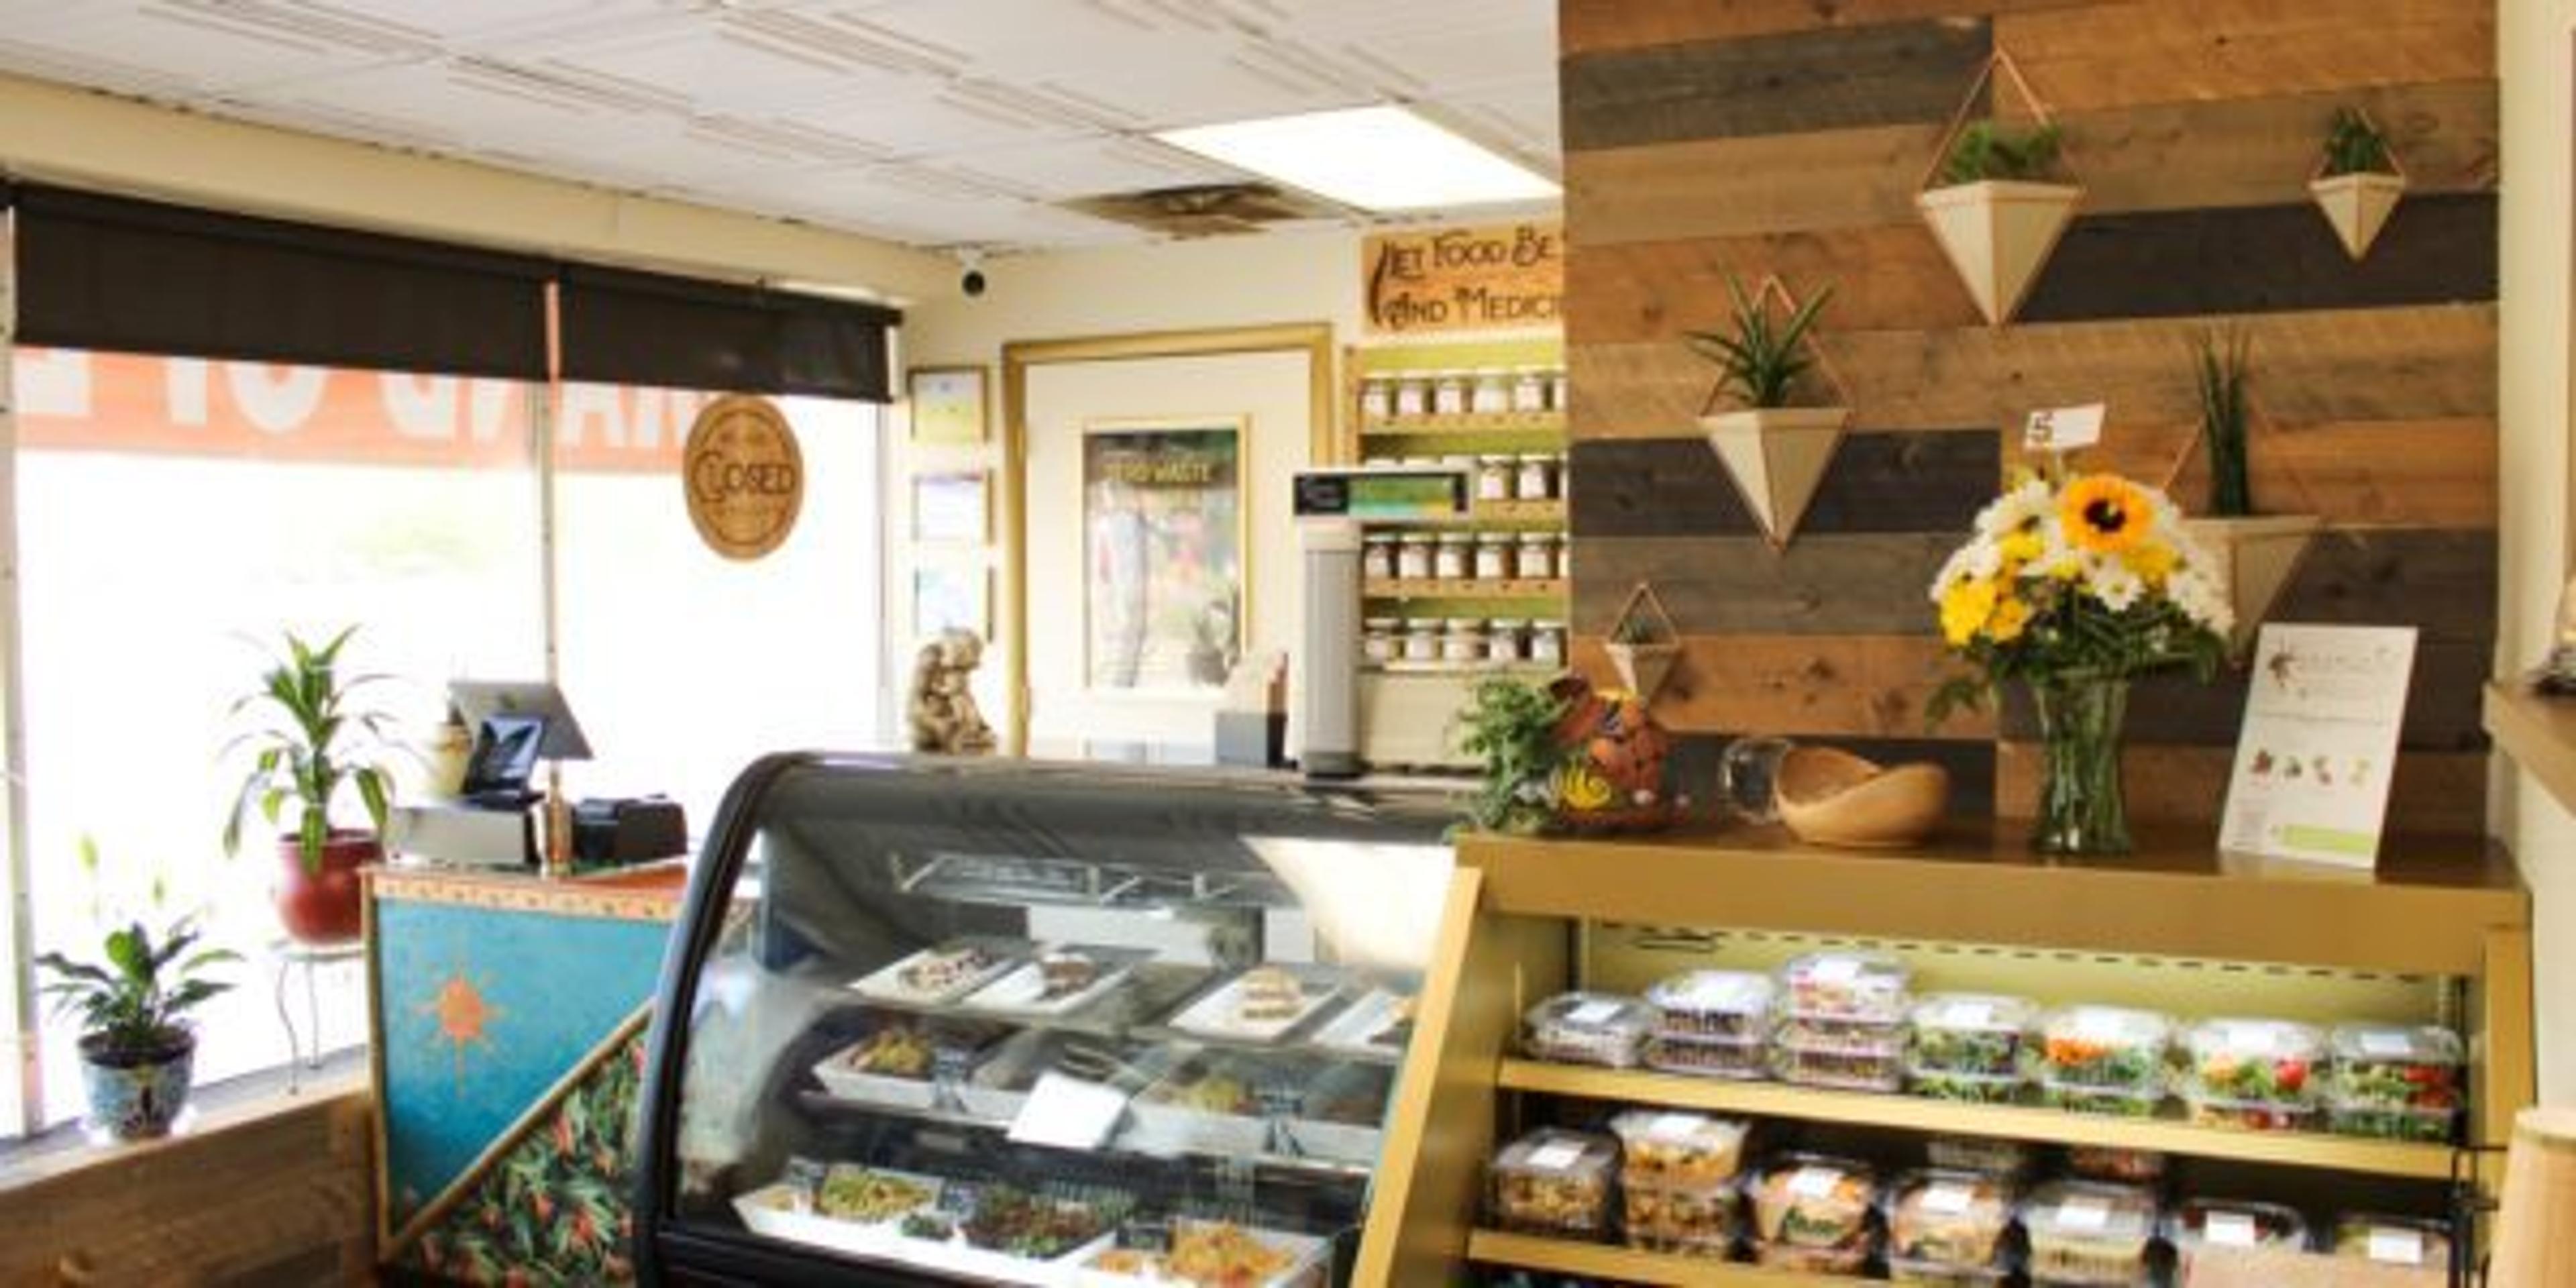 One of metro Detroit's fastest growing vegan grab-and-go shops, Aratham Gourmet to Go makes fresh and diverse breakfasts, lunches and dinners.